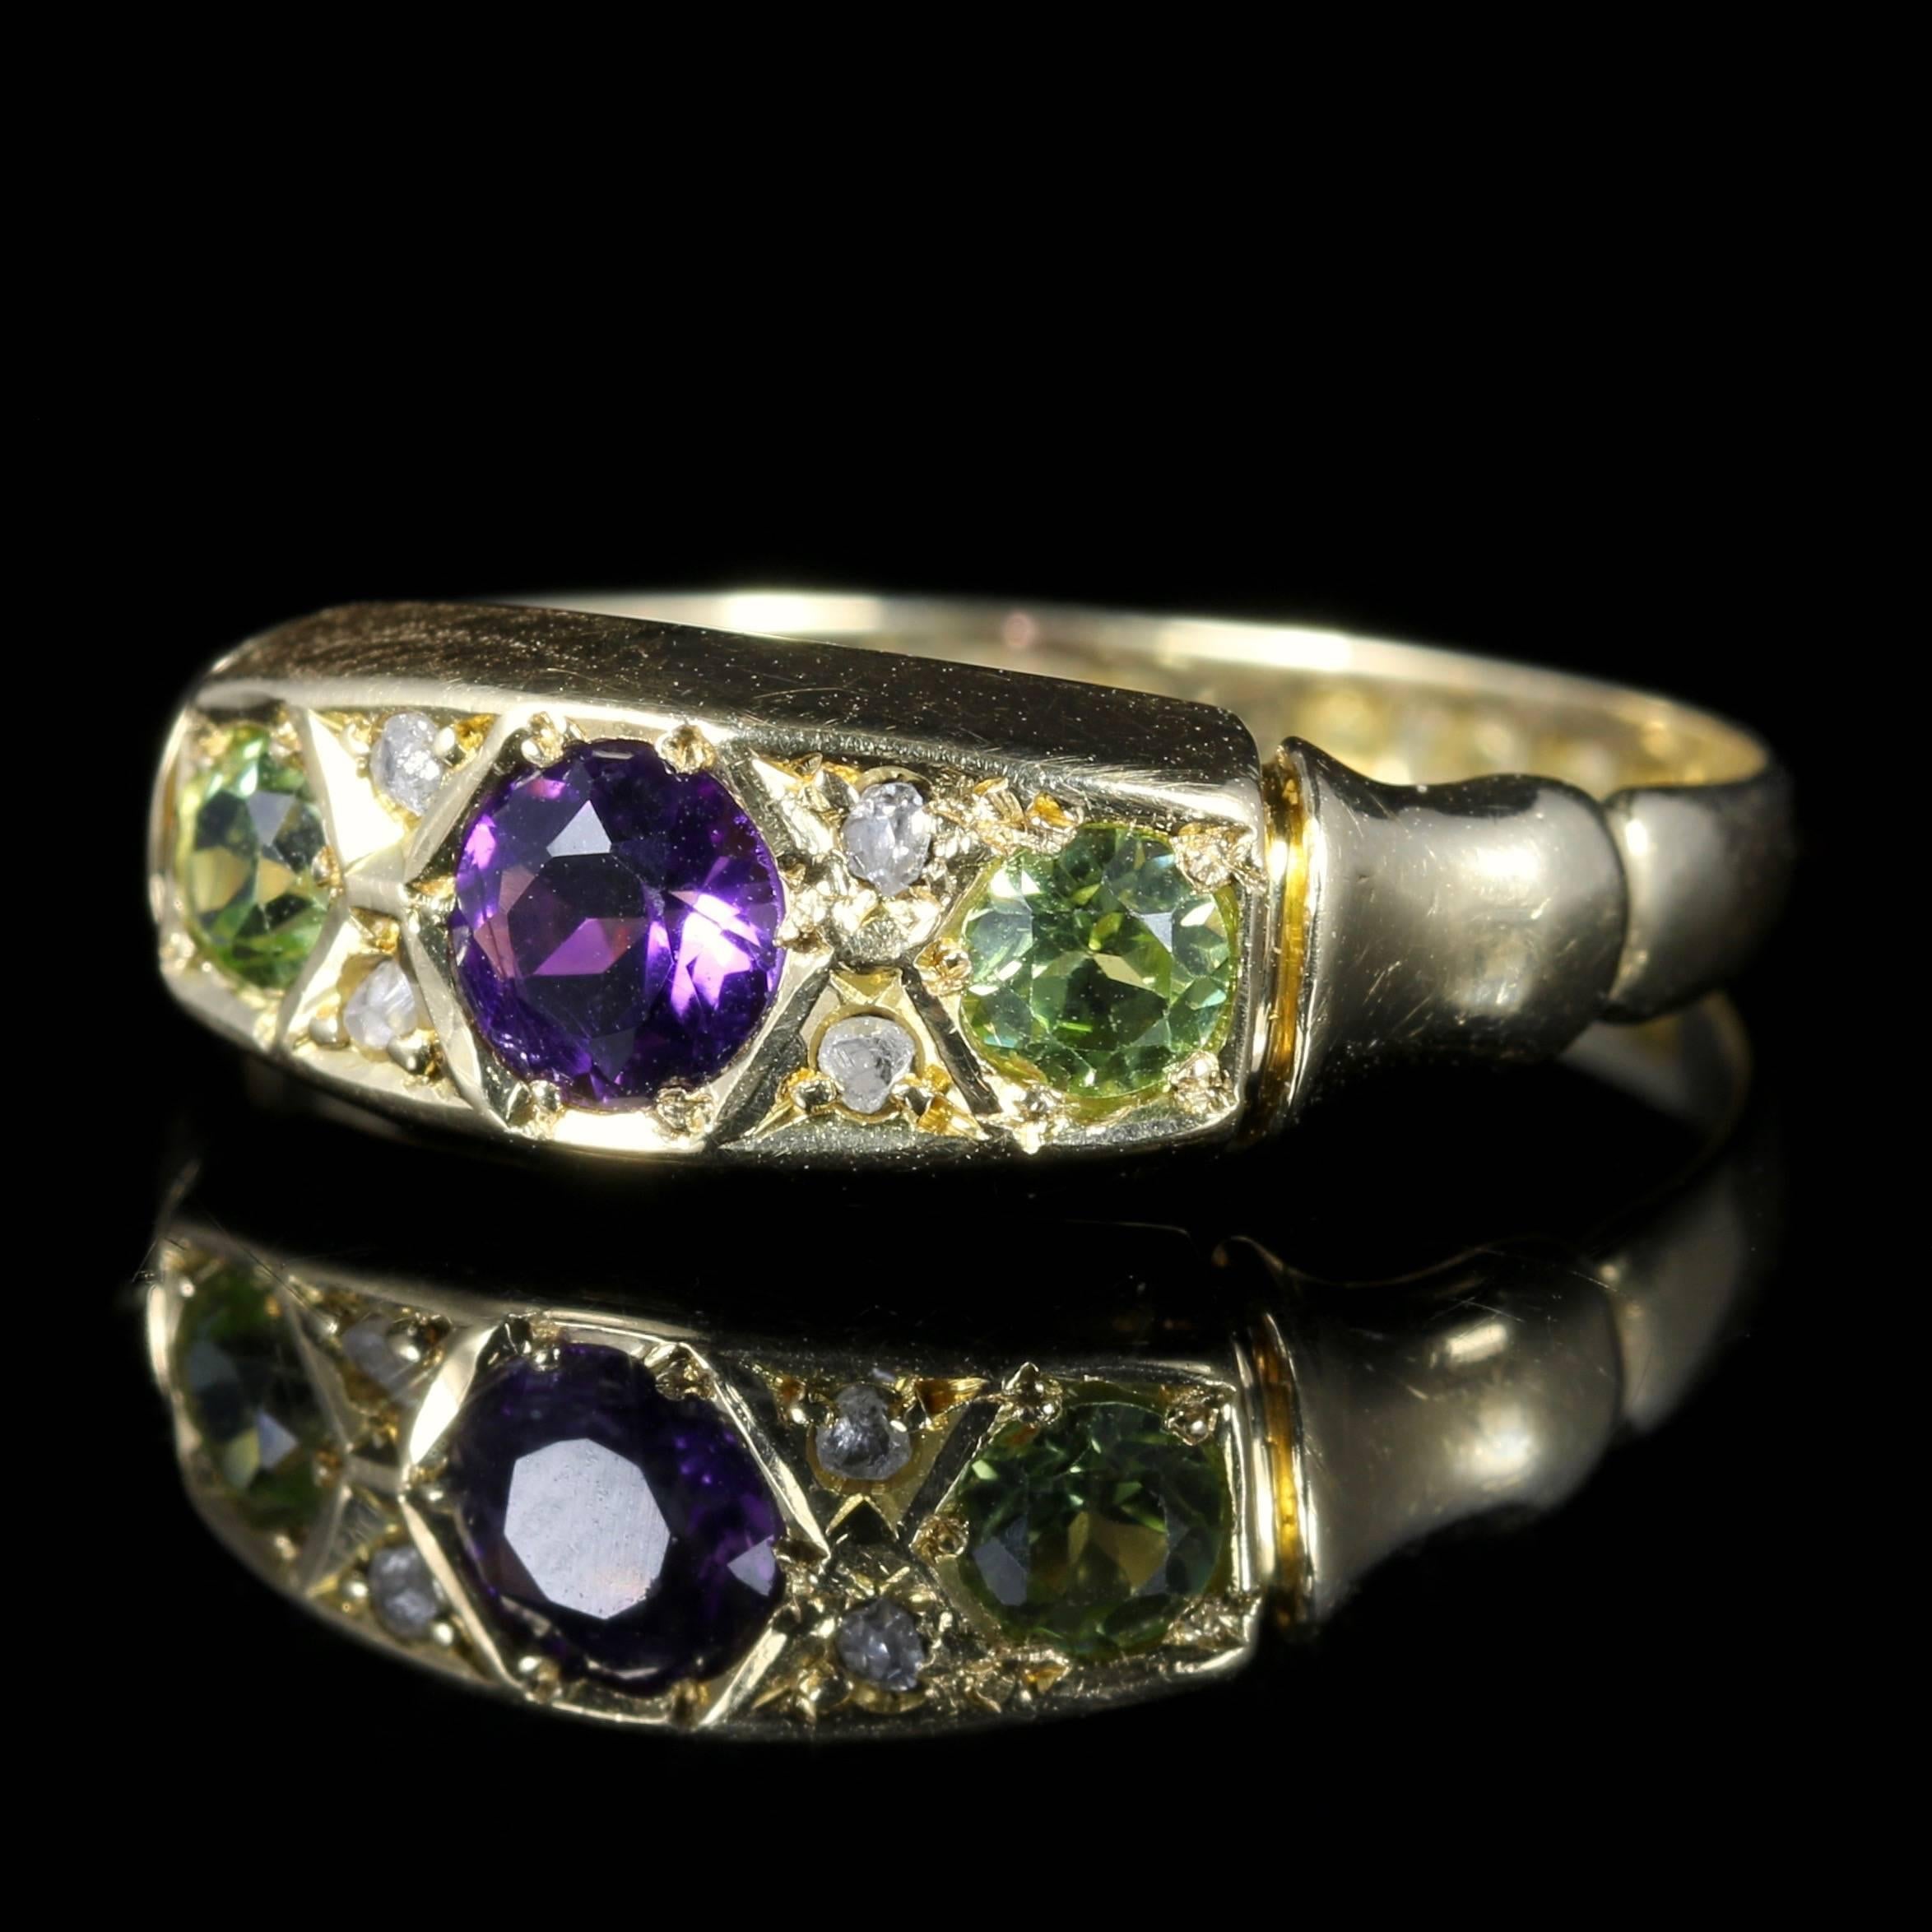 For more details please click continue reading down below...

This stunning antique Suffragette ring is set in 18ct Gold, set with Amethyst Peridots and Diamonds.

This ring is genuine old, hallmarked Birmingham 1902 and 18ct.

Emmeline Pankhurst